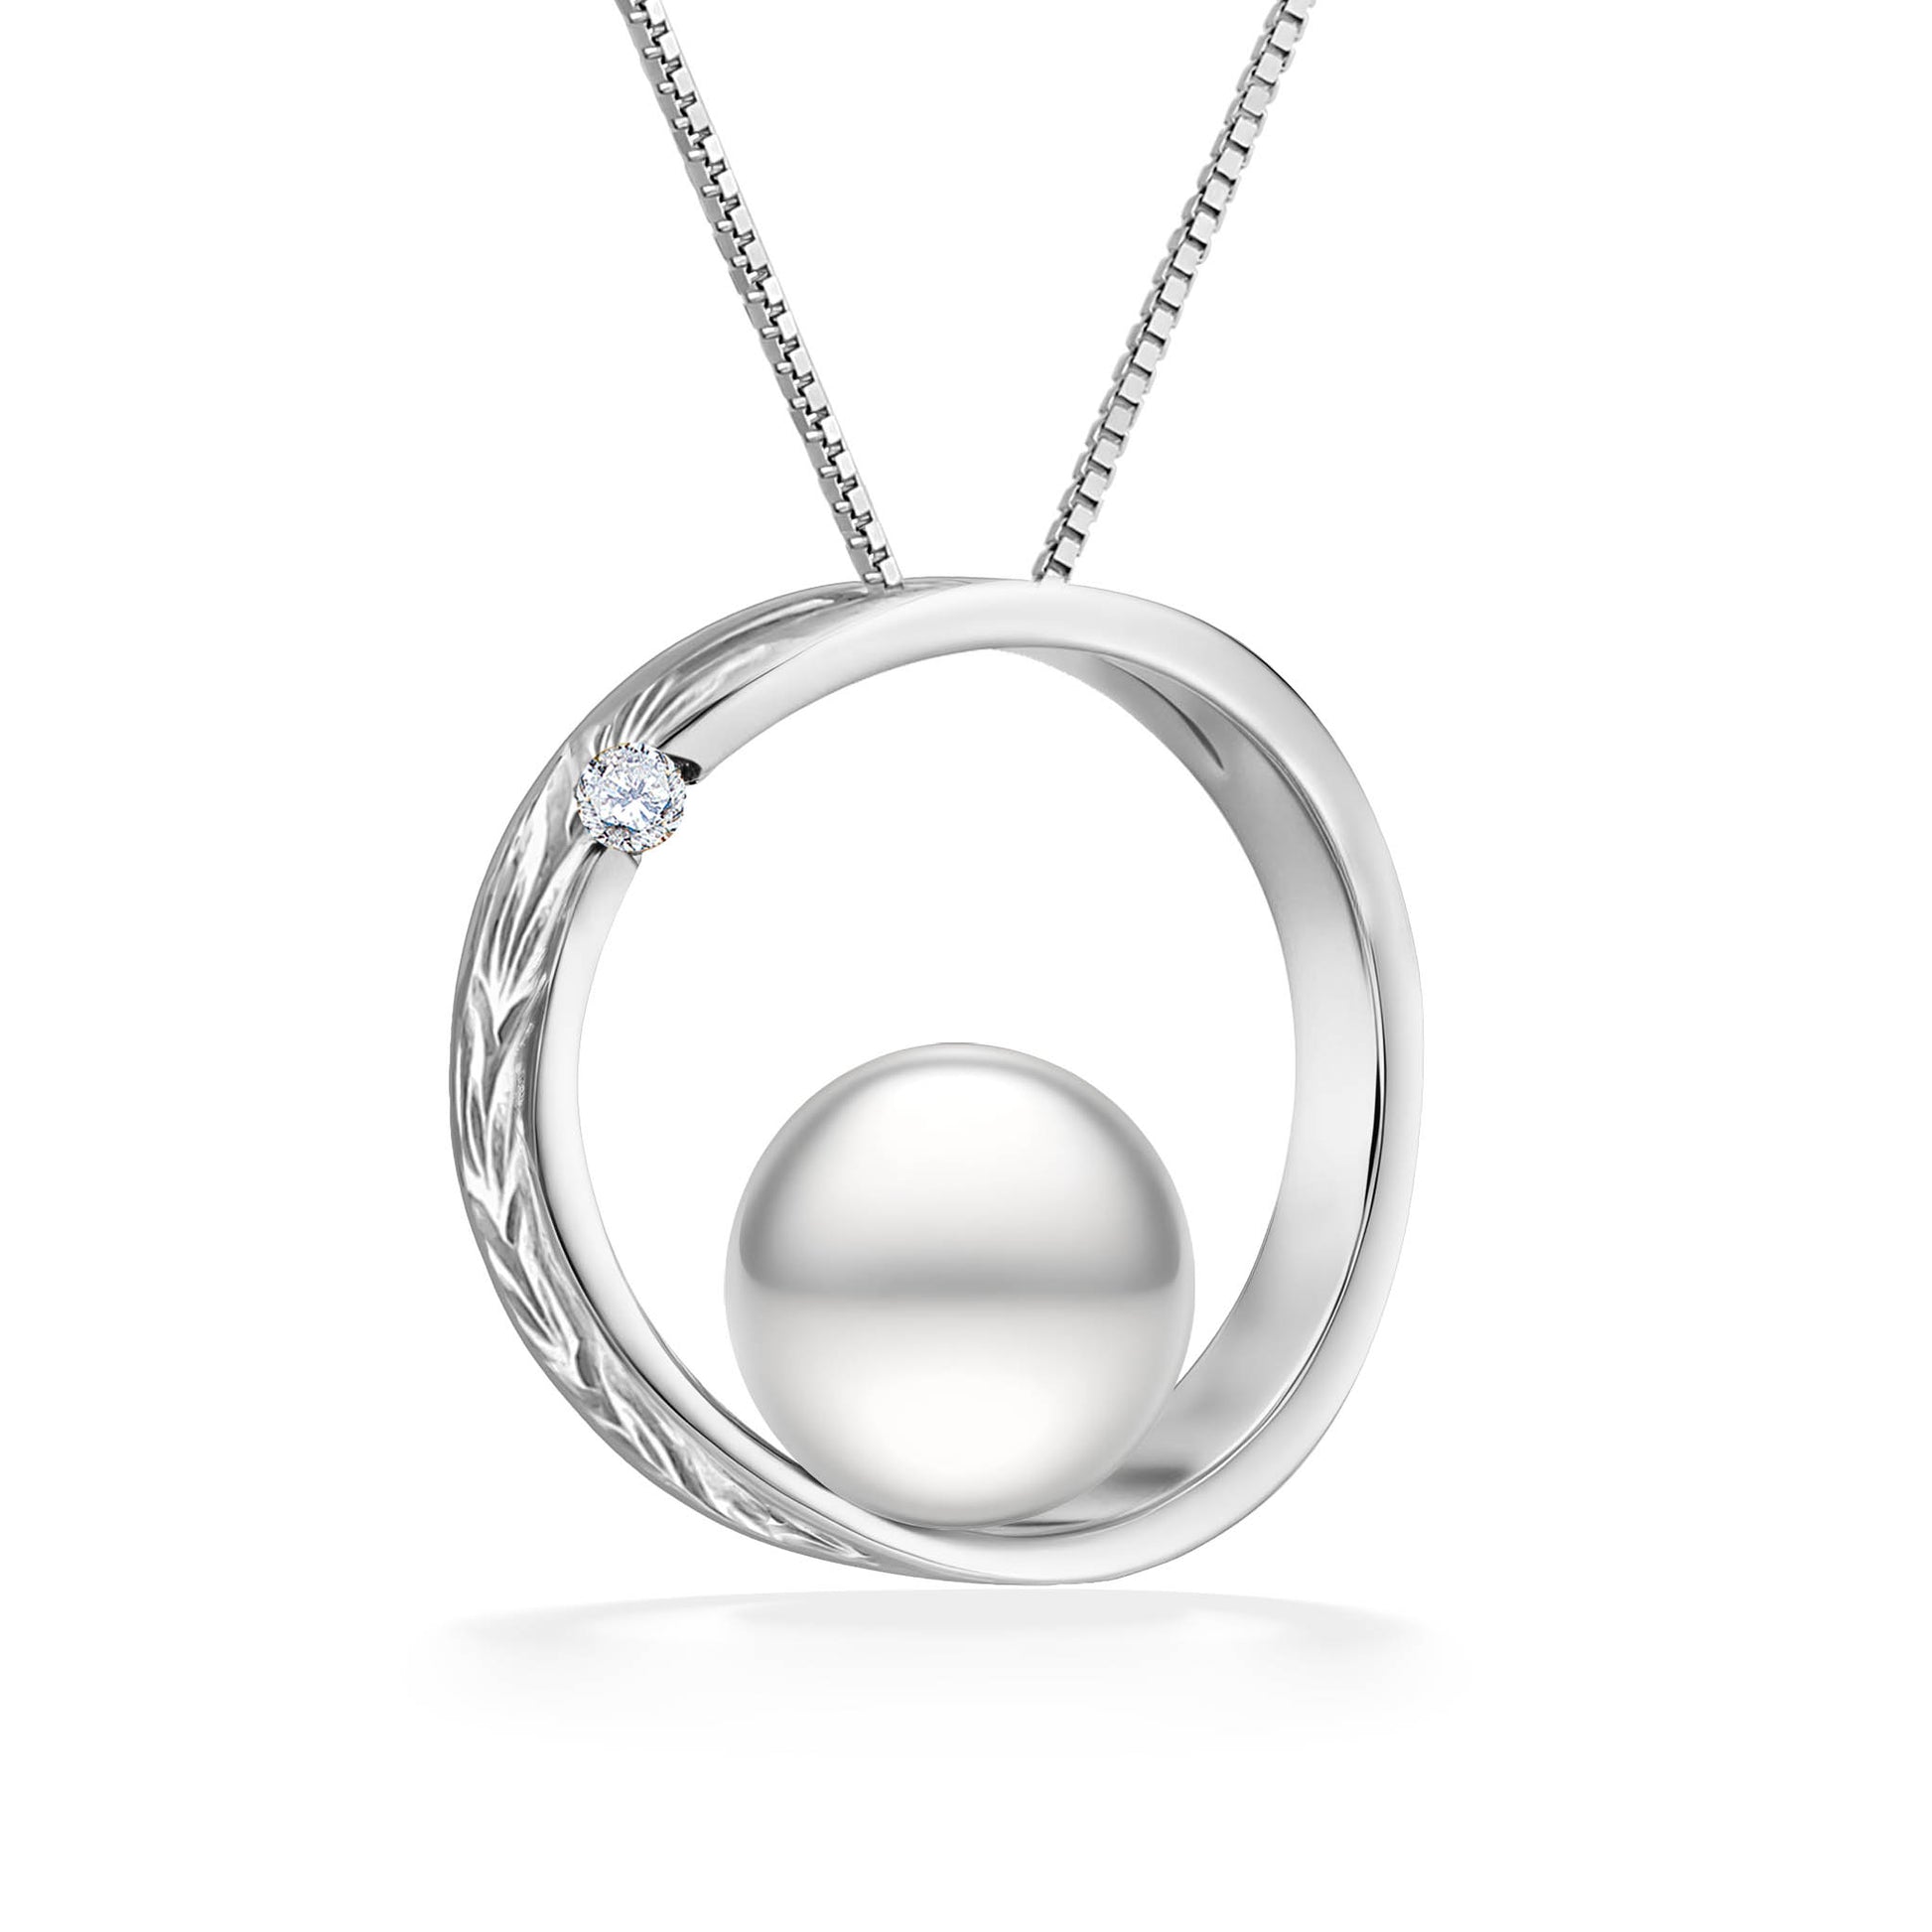 43163 - 14K White Gold - Moon and Star Pendant